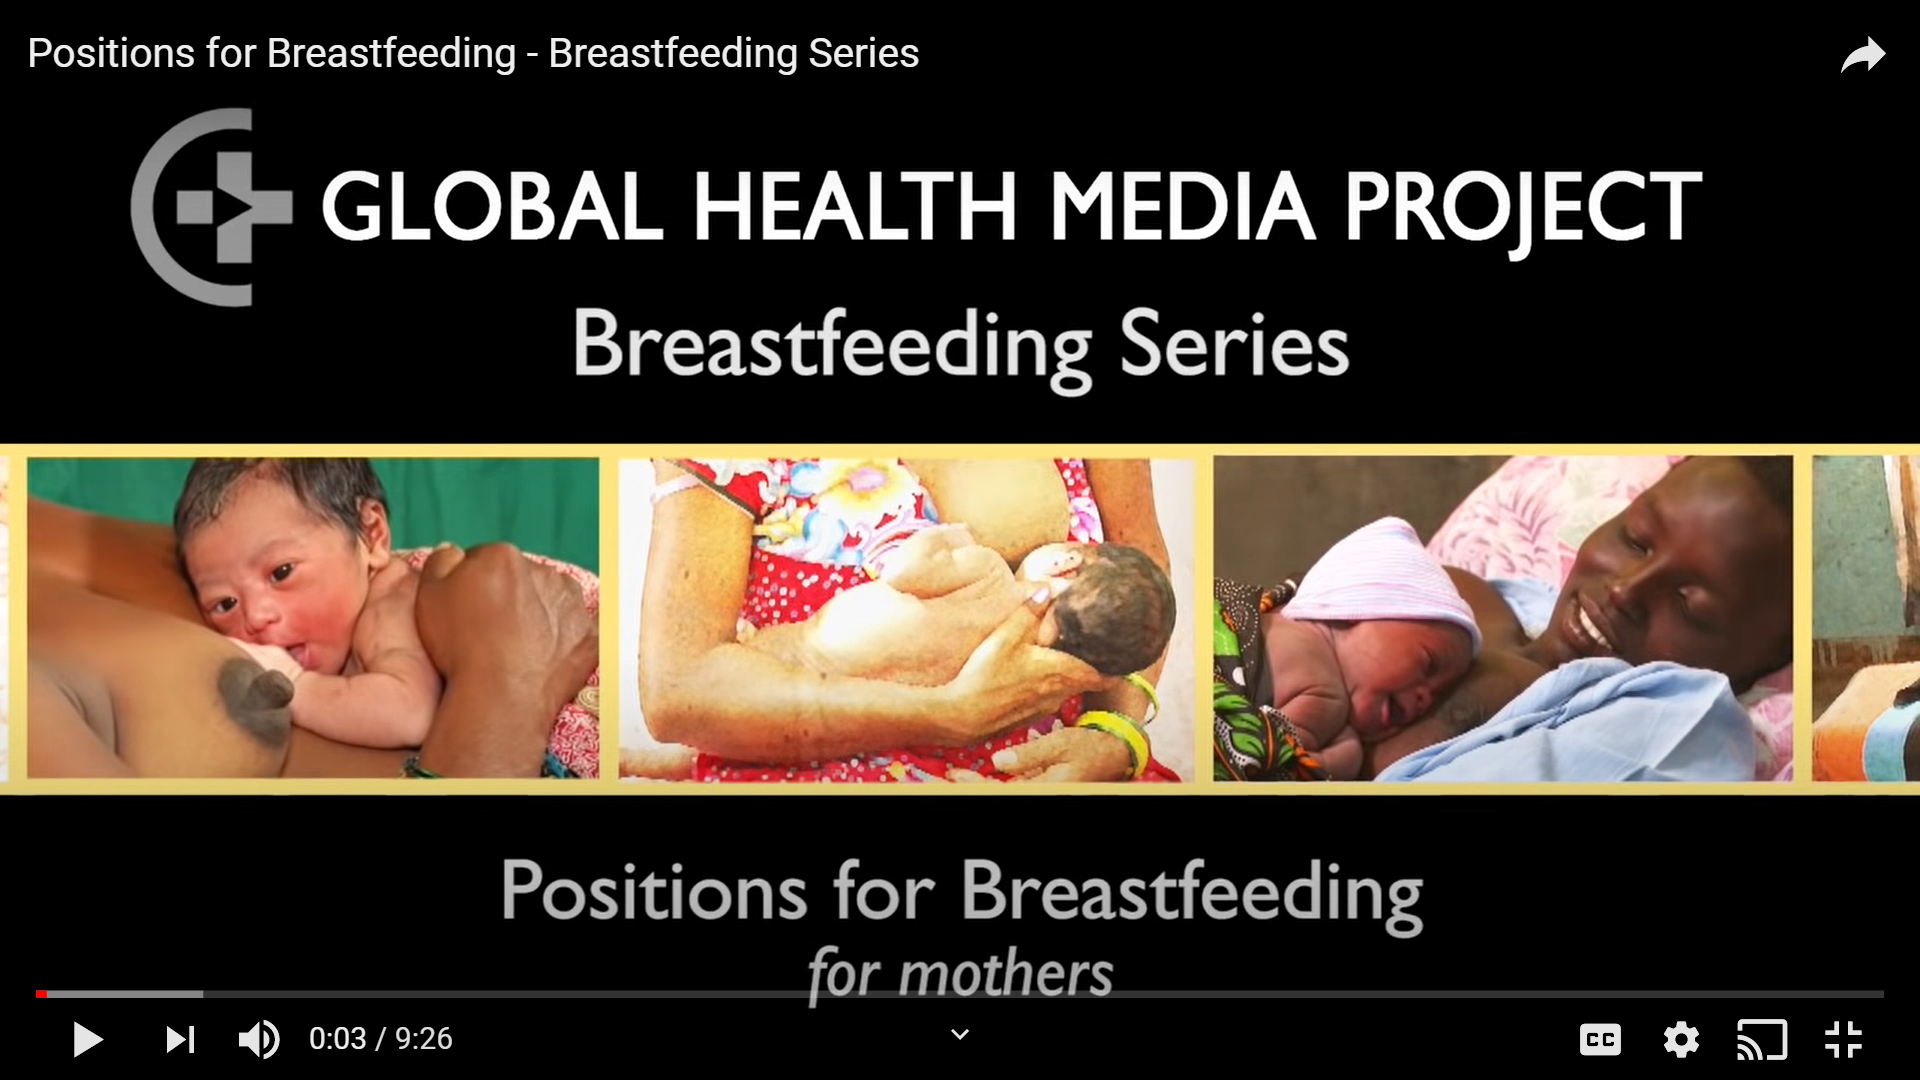 Positions for Breastfeeding (Global Health Media Project)